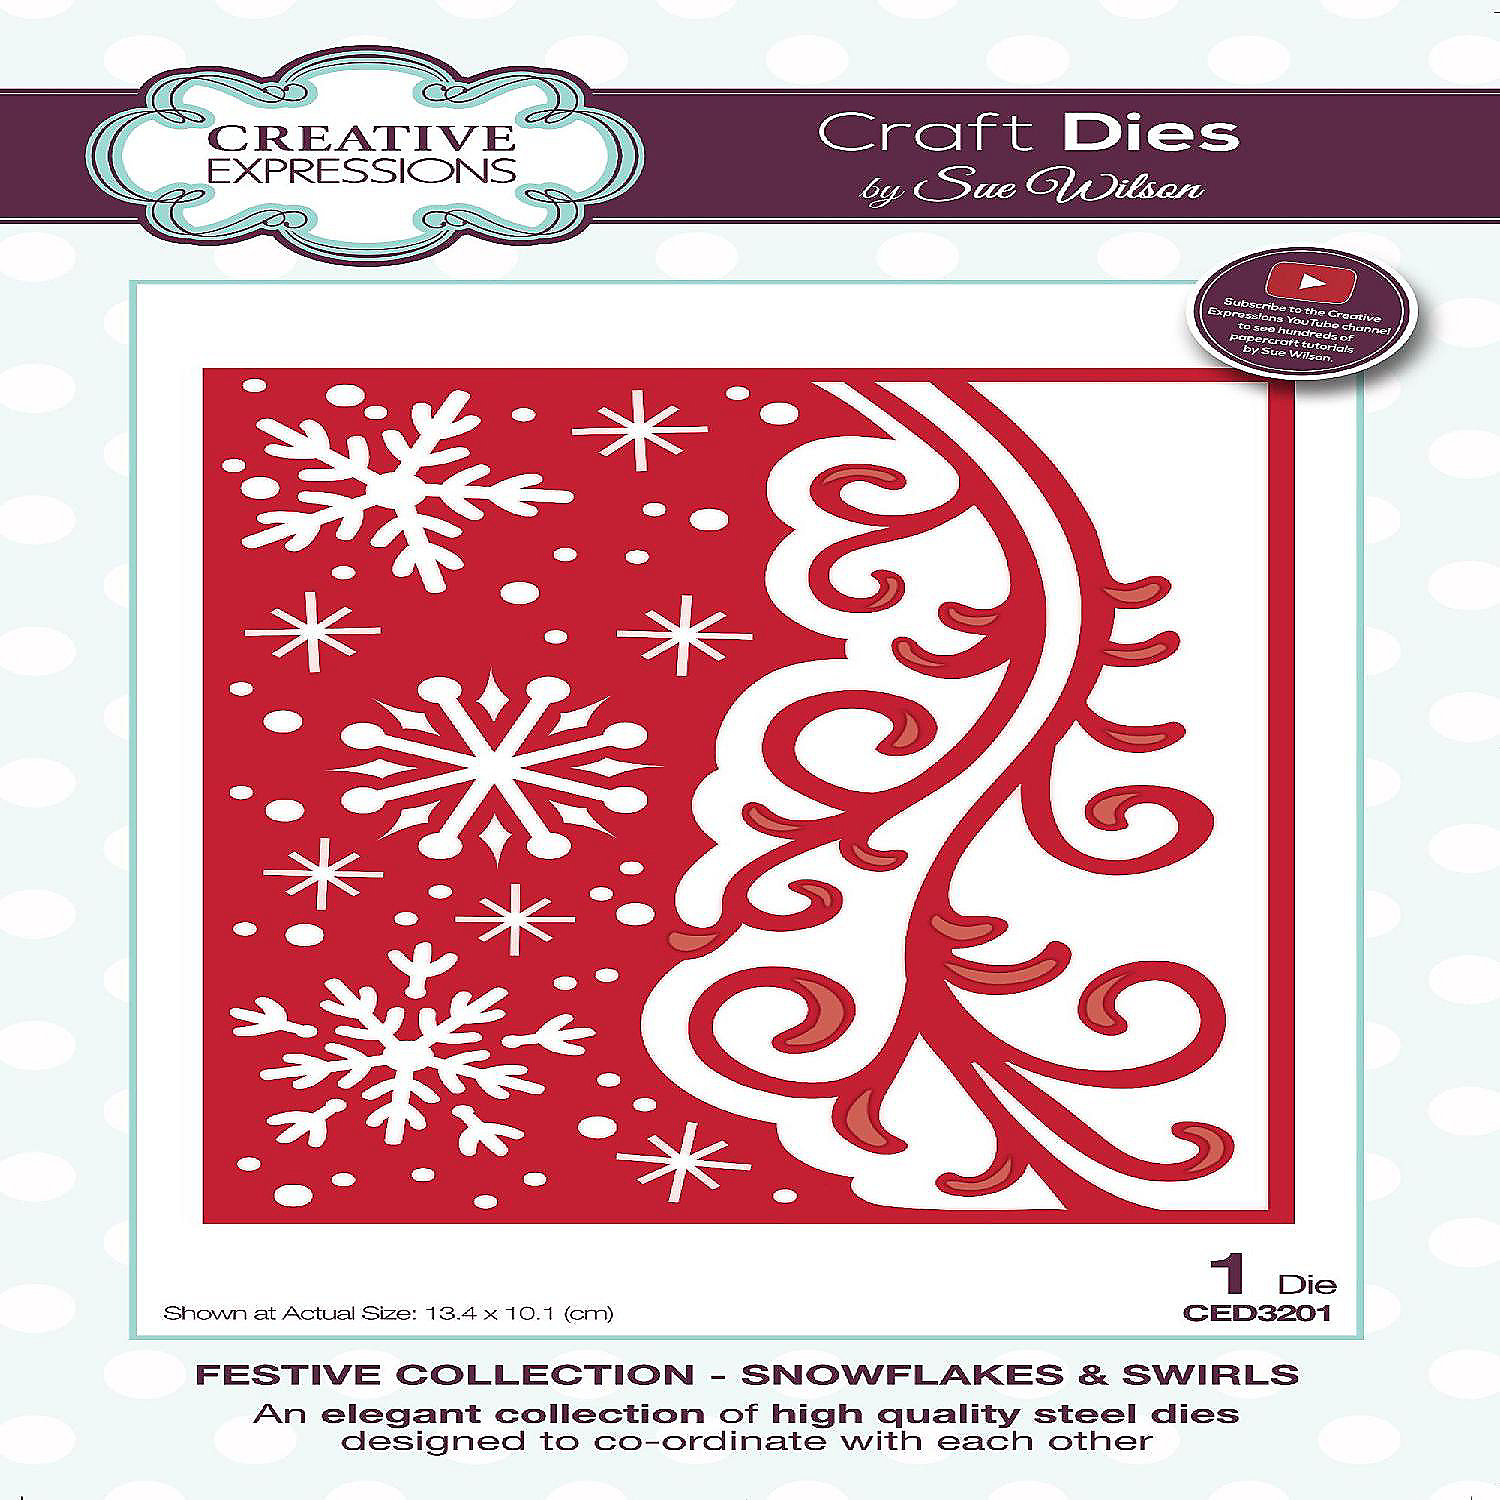 Creative Expressions Dies by Sue Wilson Festive Snowflakes Swirls | Oriental Trading